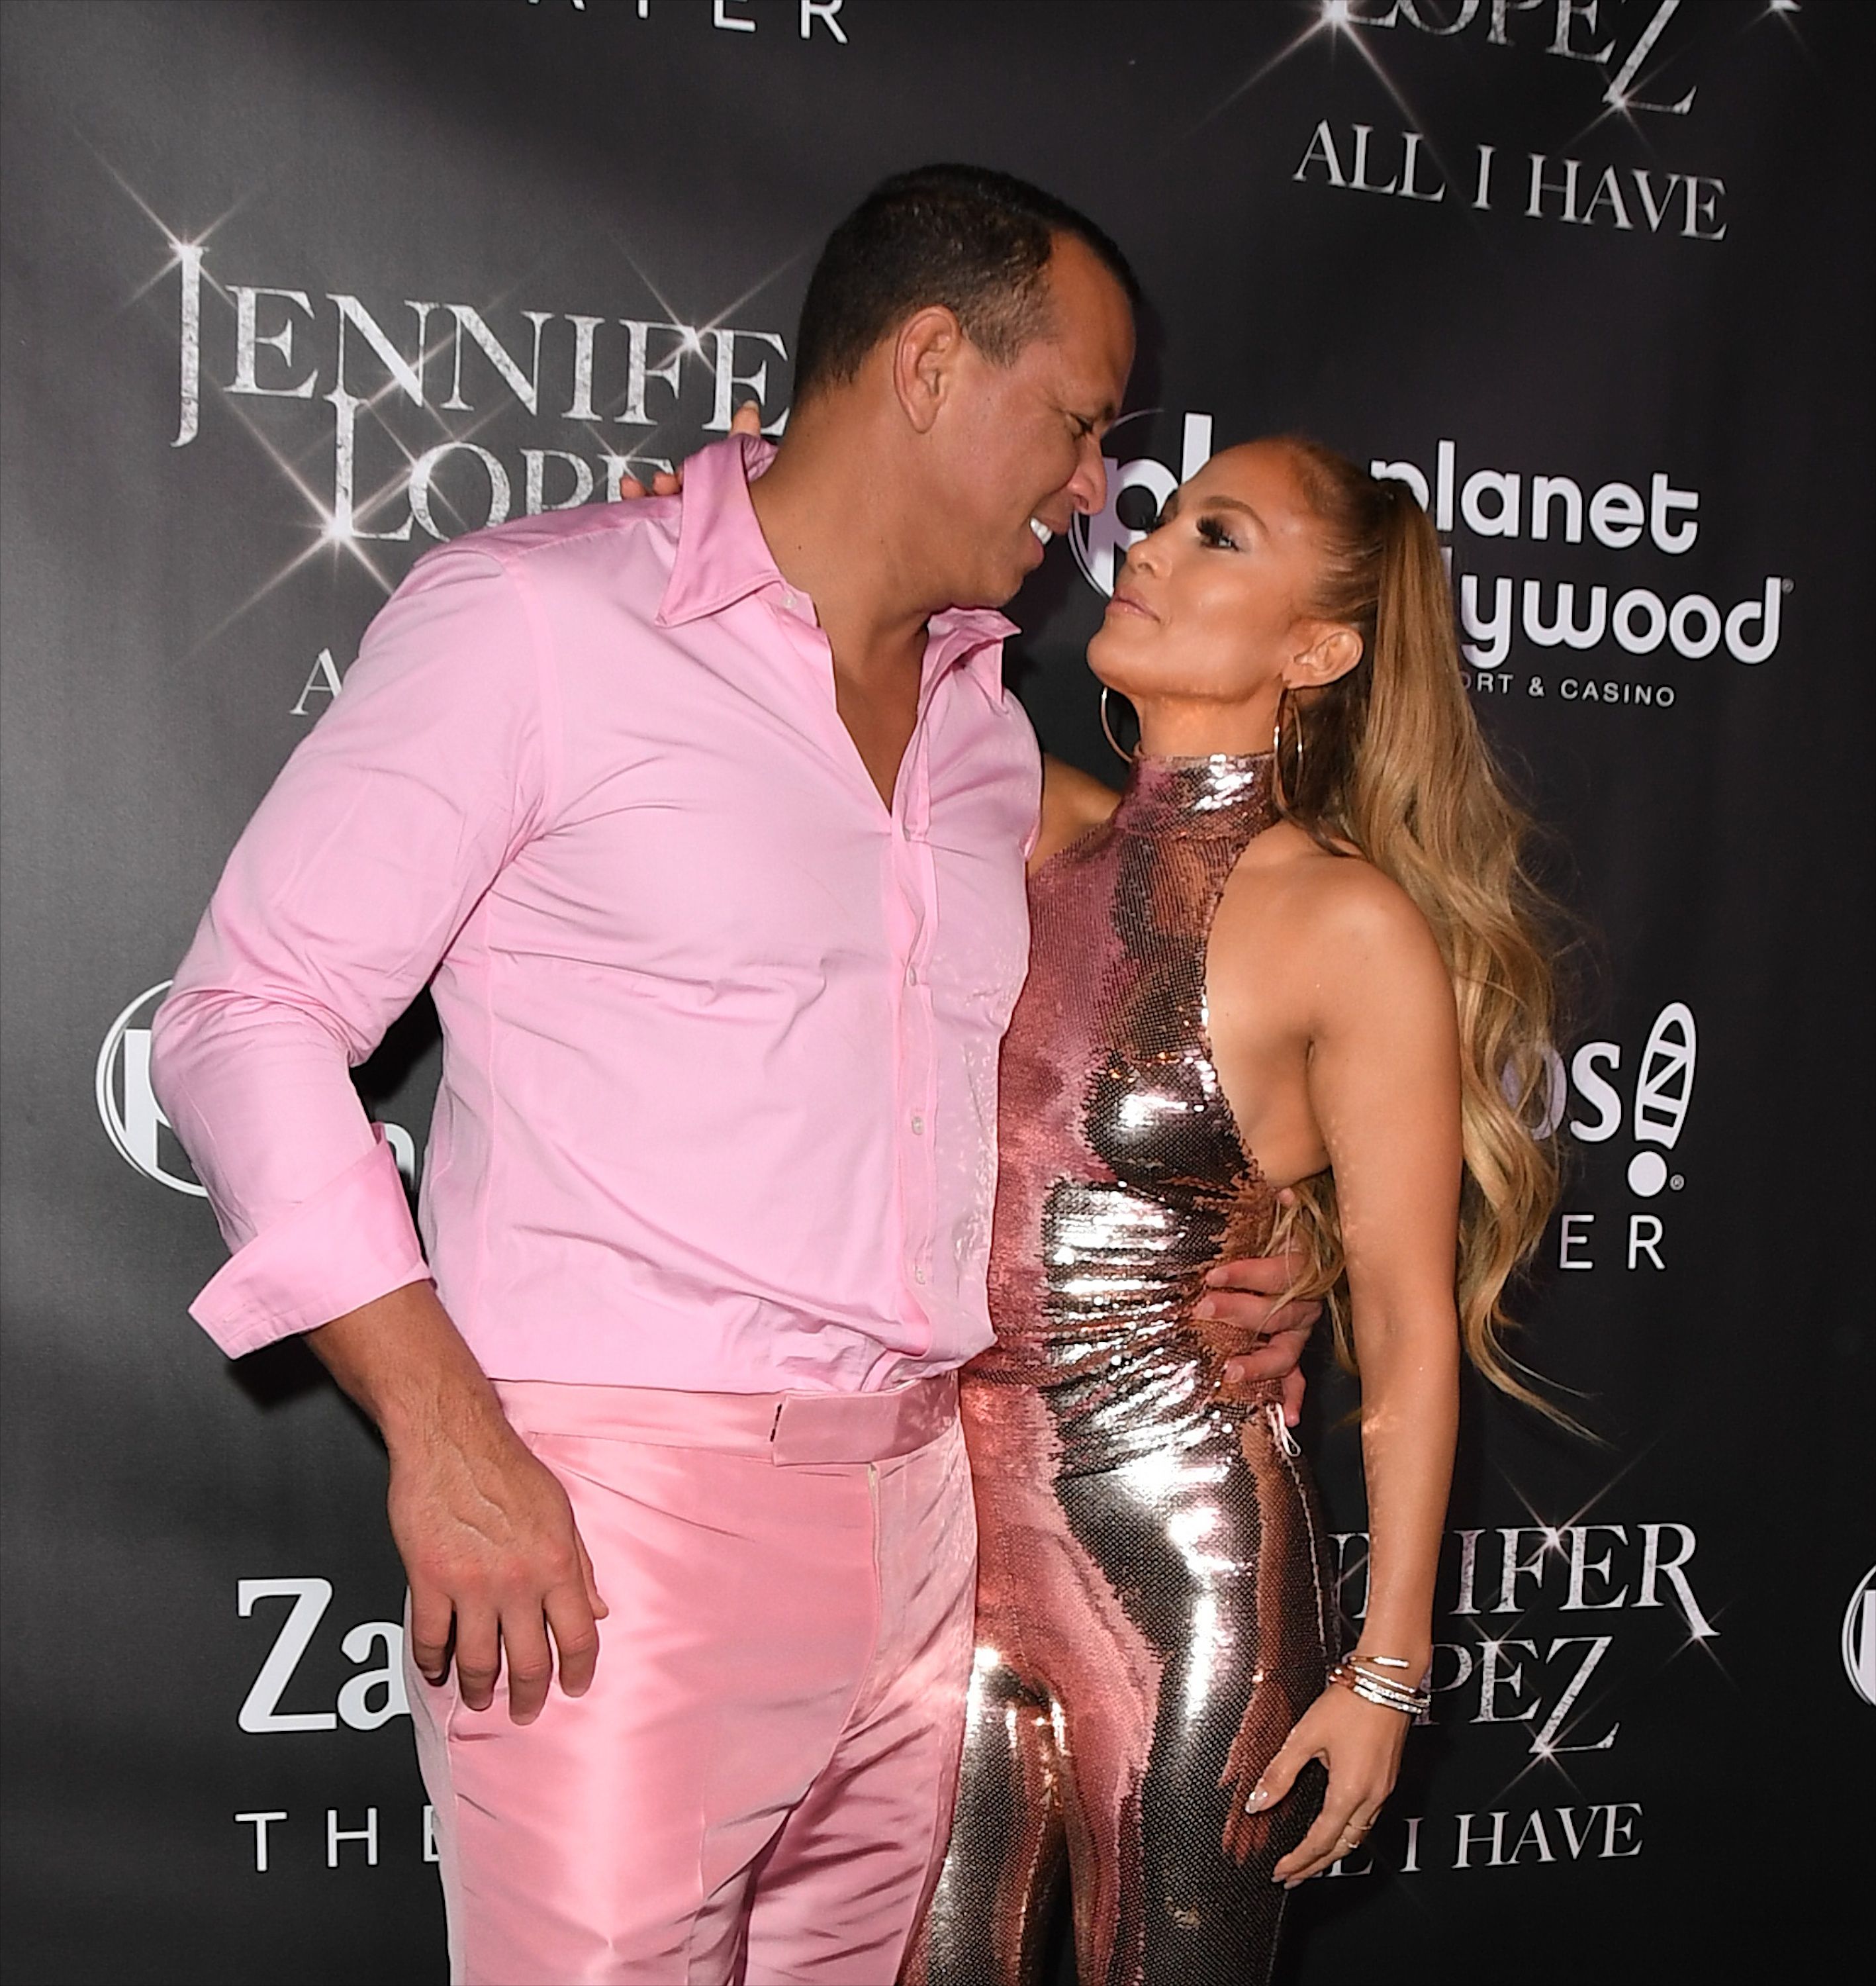 What Is the Age Difference Between Jennifer Lopez and Alex Rodriguez?